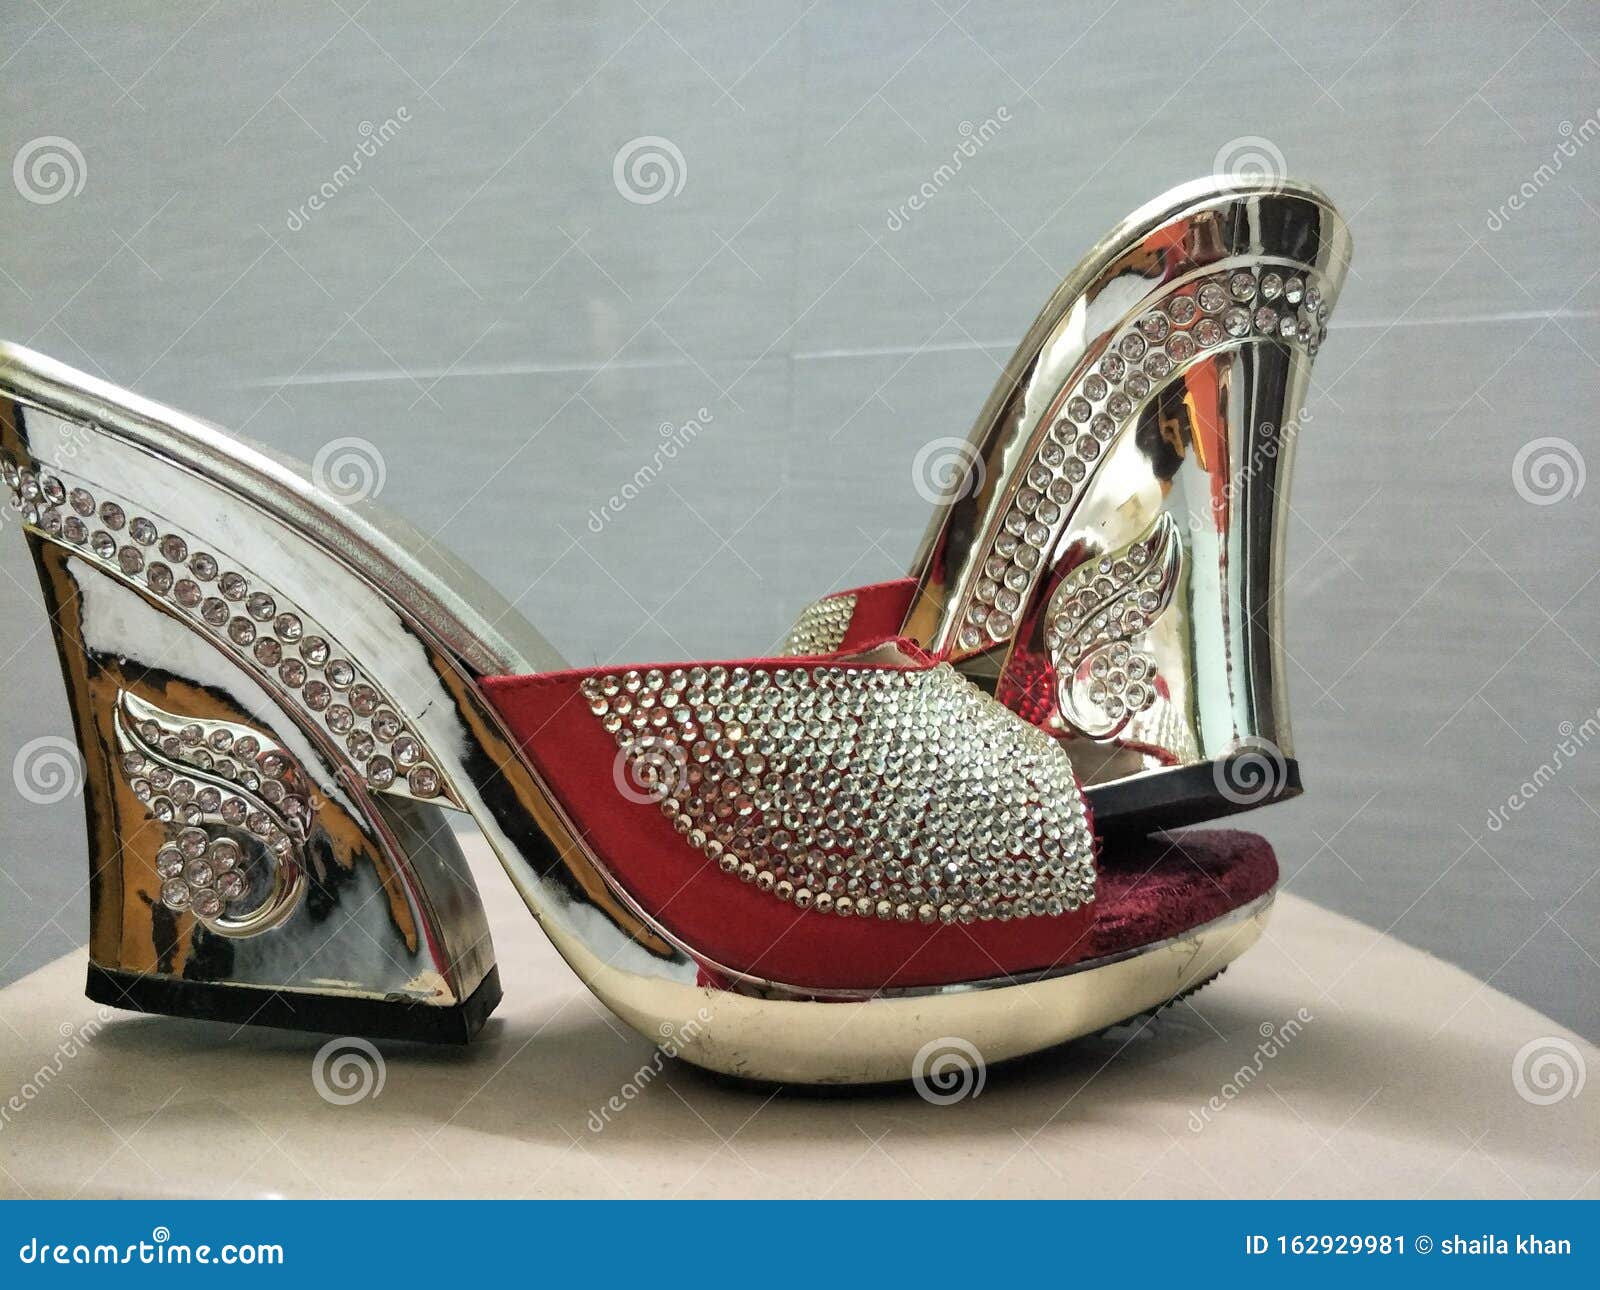 High heels in red color stock image. Image of sandals - 162929981